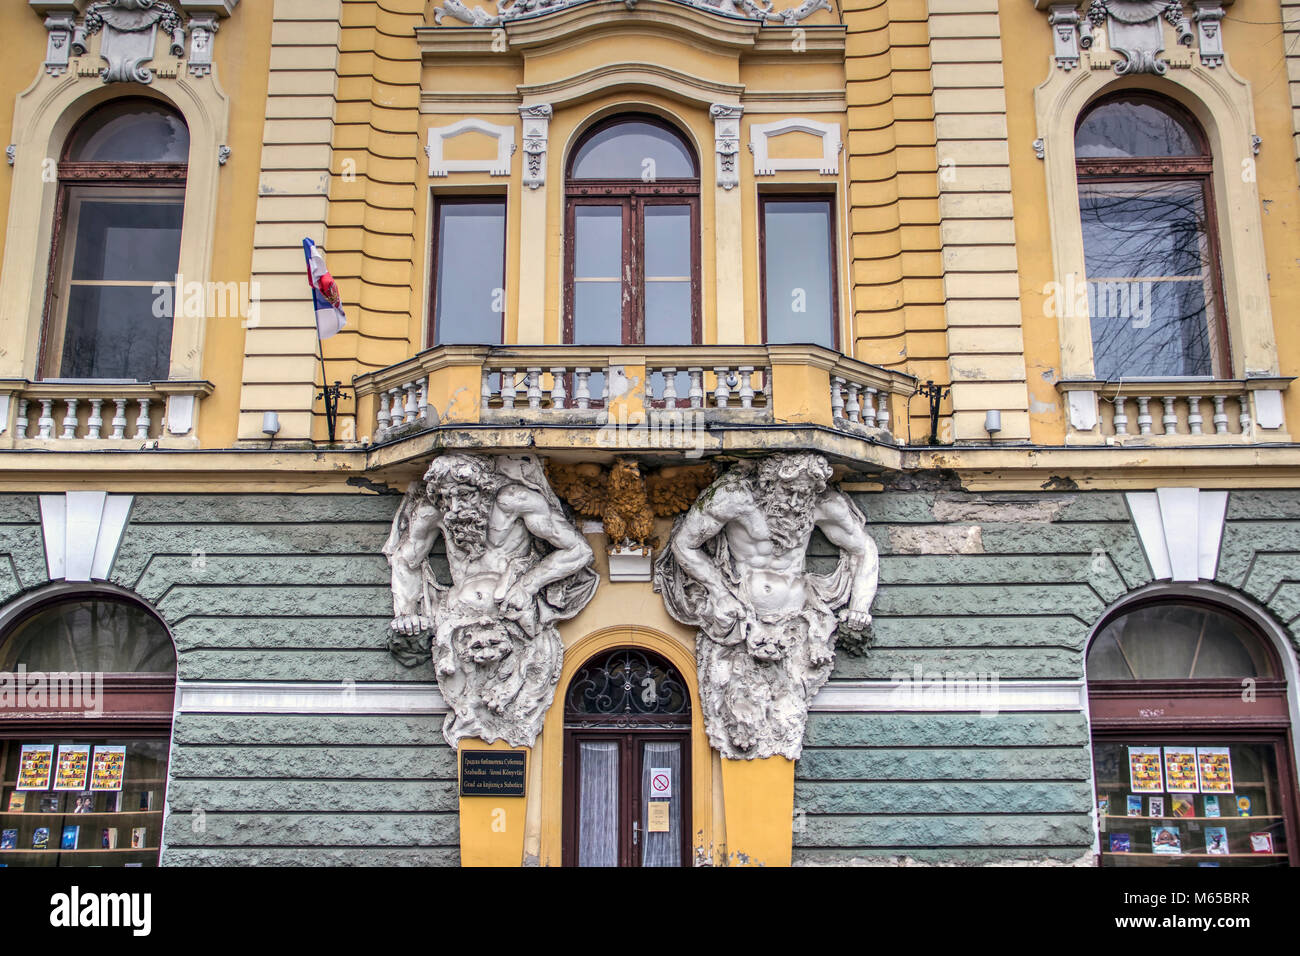 SUBOTICA, VOJVODINA, SERBIA: Front wall of the City Library with two Atlas figures supporting the balcony Stock Photo